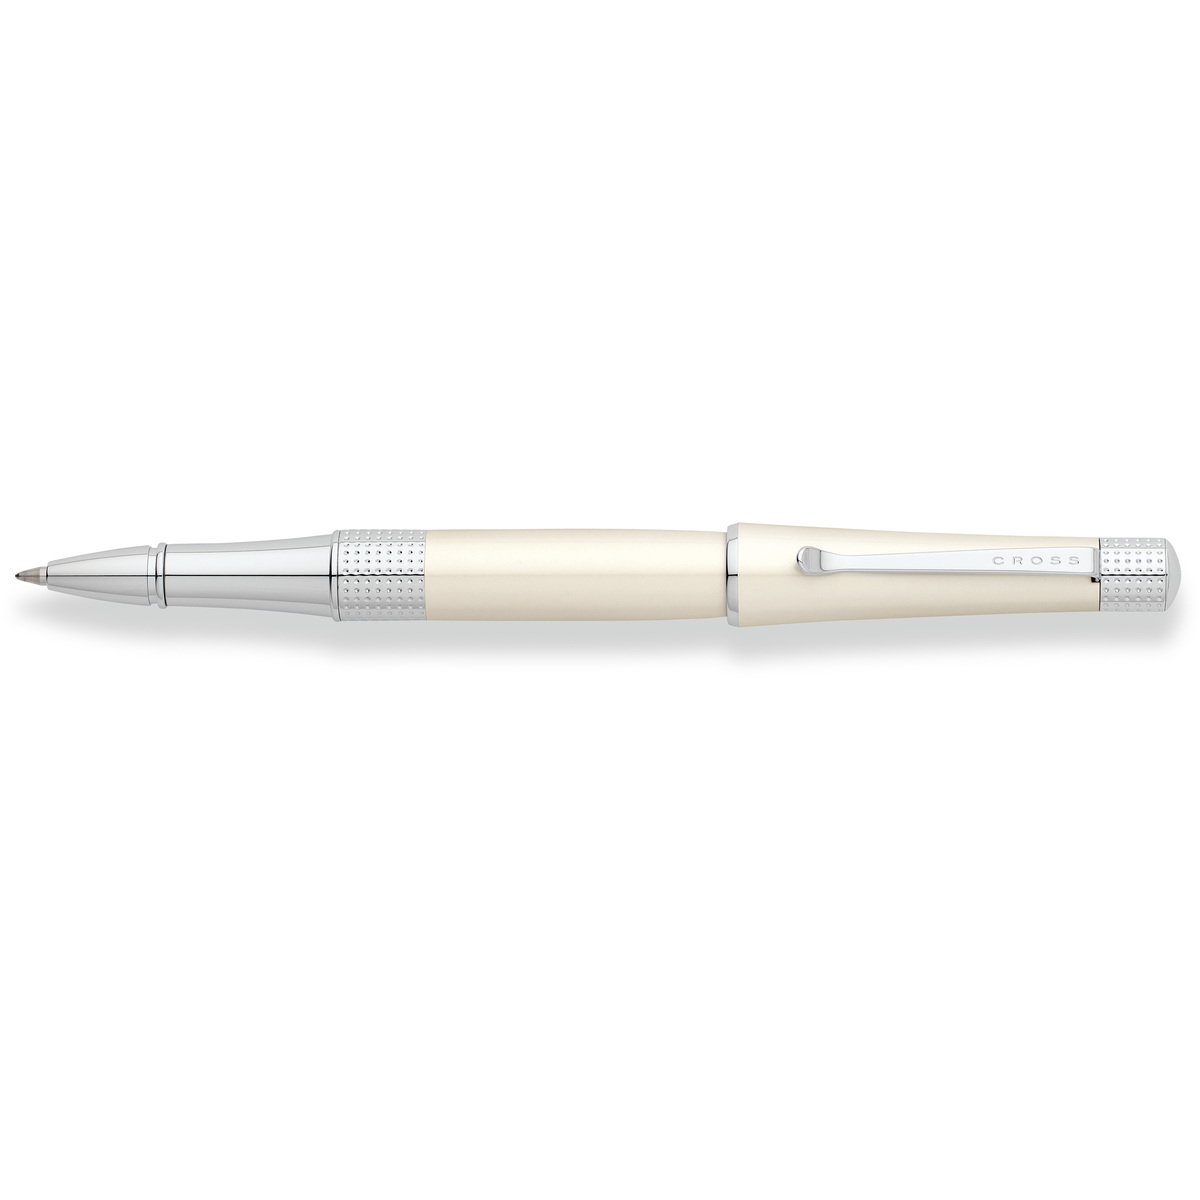 Stylo Convertible Cross Beverly laque blanche